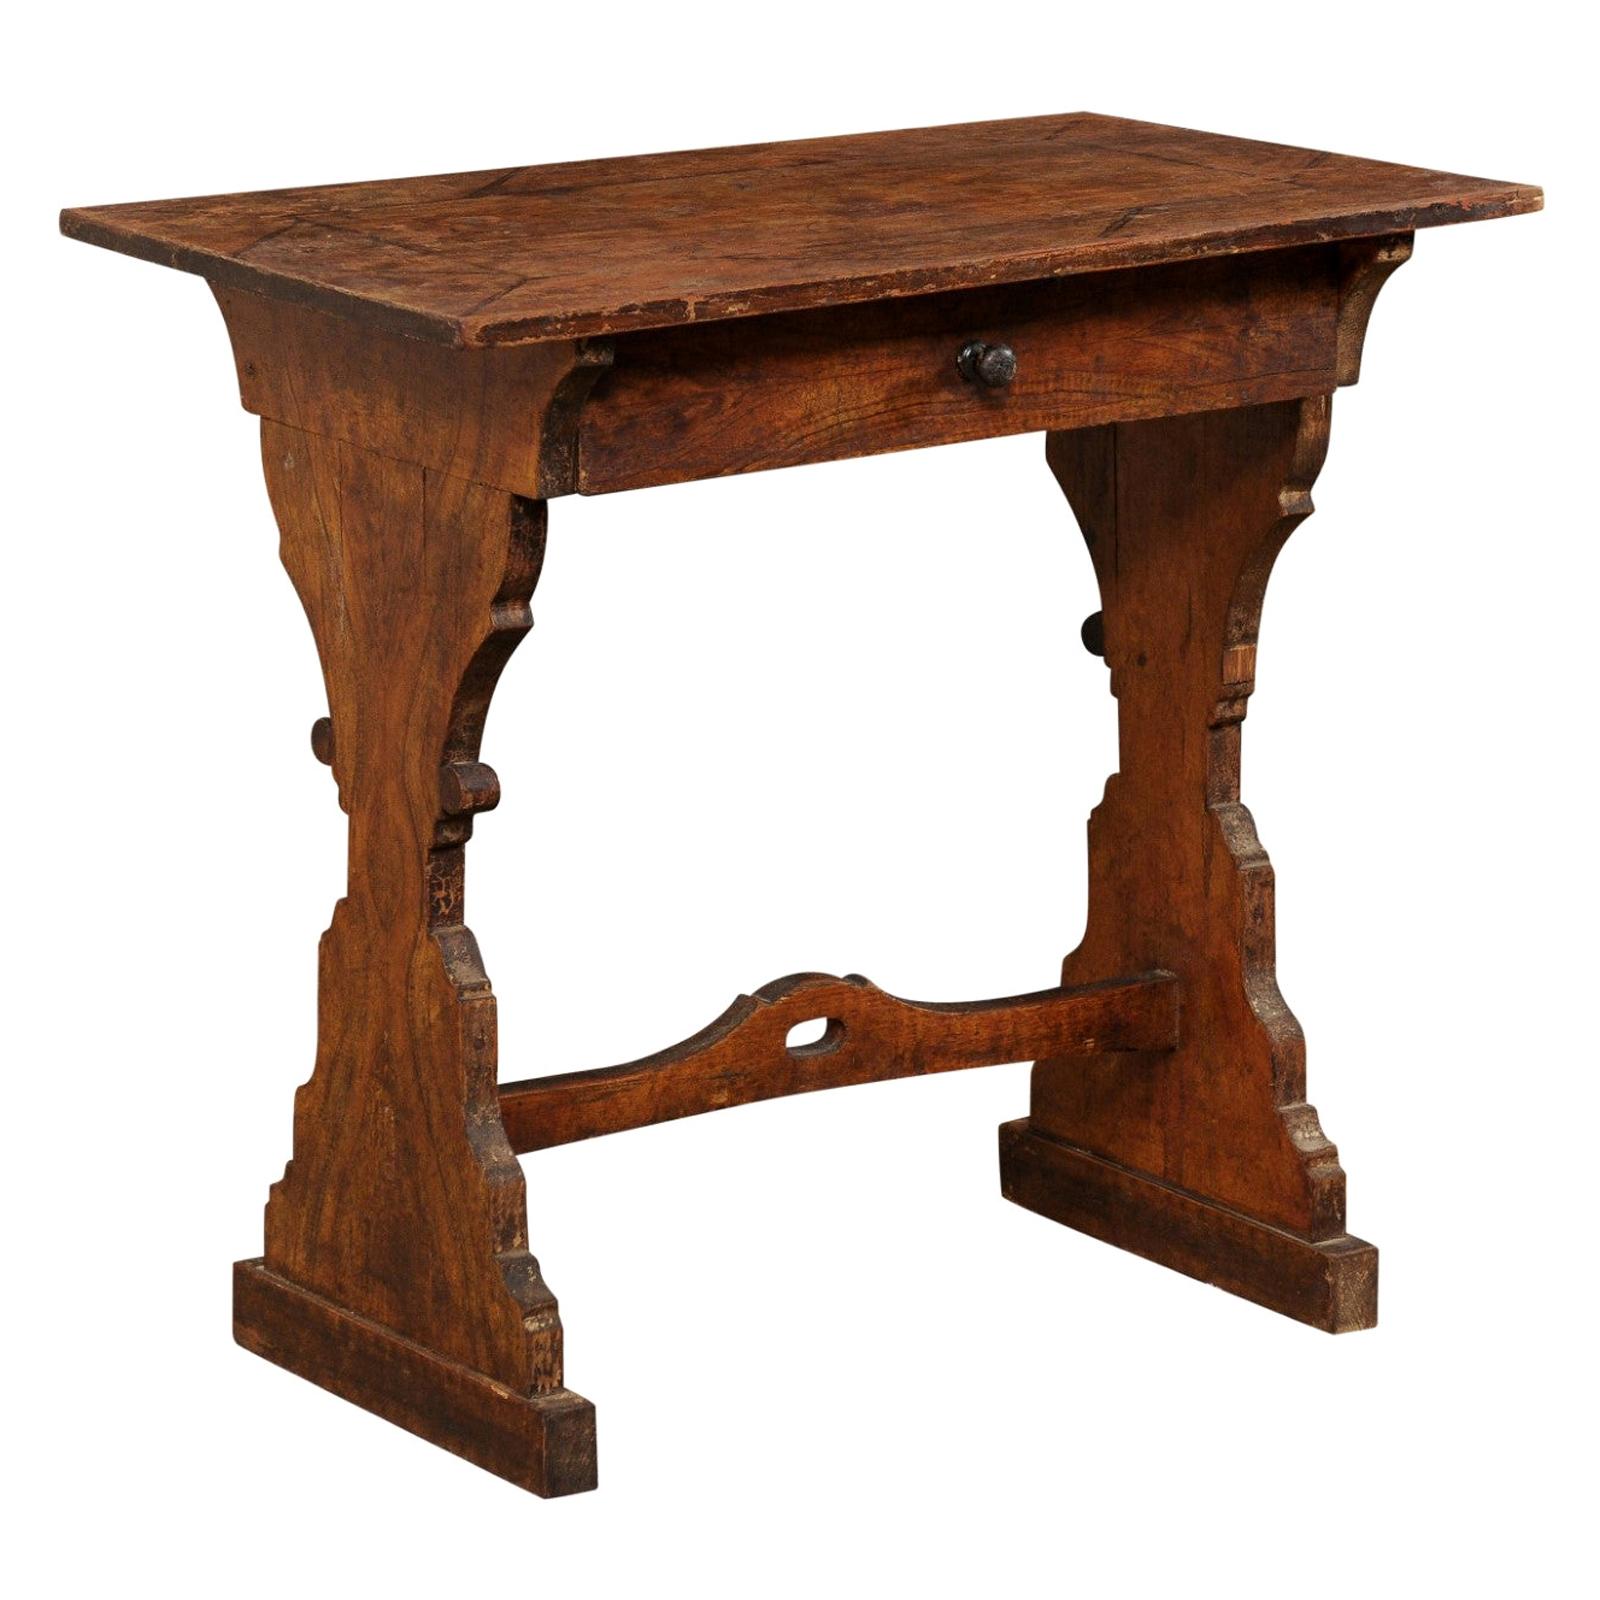 Italian Smaller-Sized Table or Writing Desk w/Shapely Hourglass Legs, 19th C.